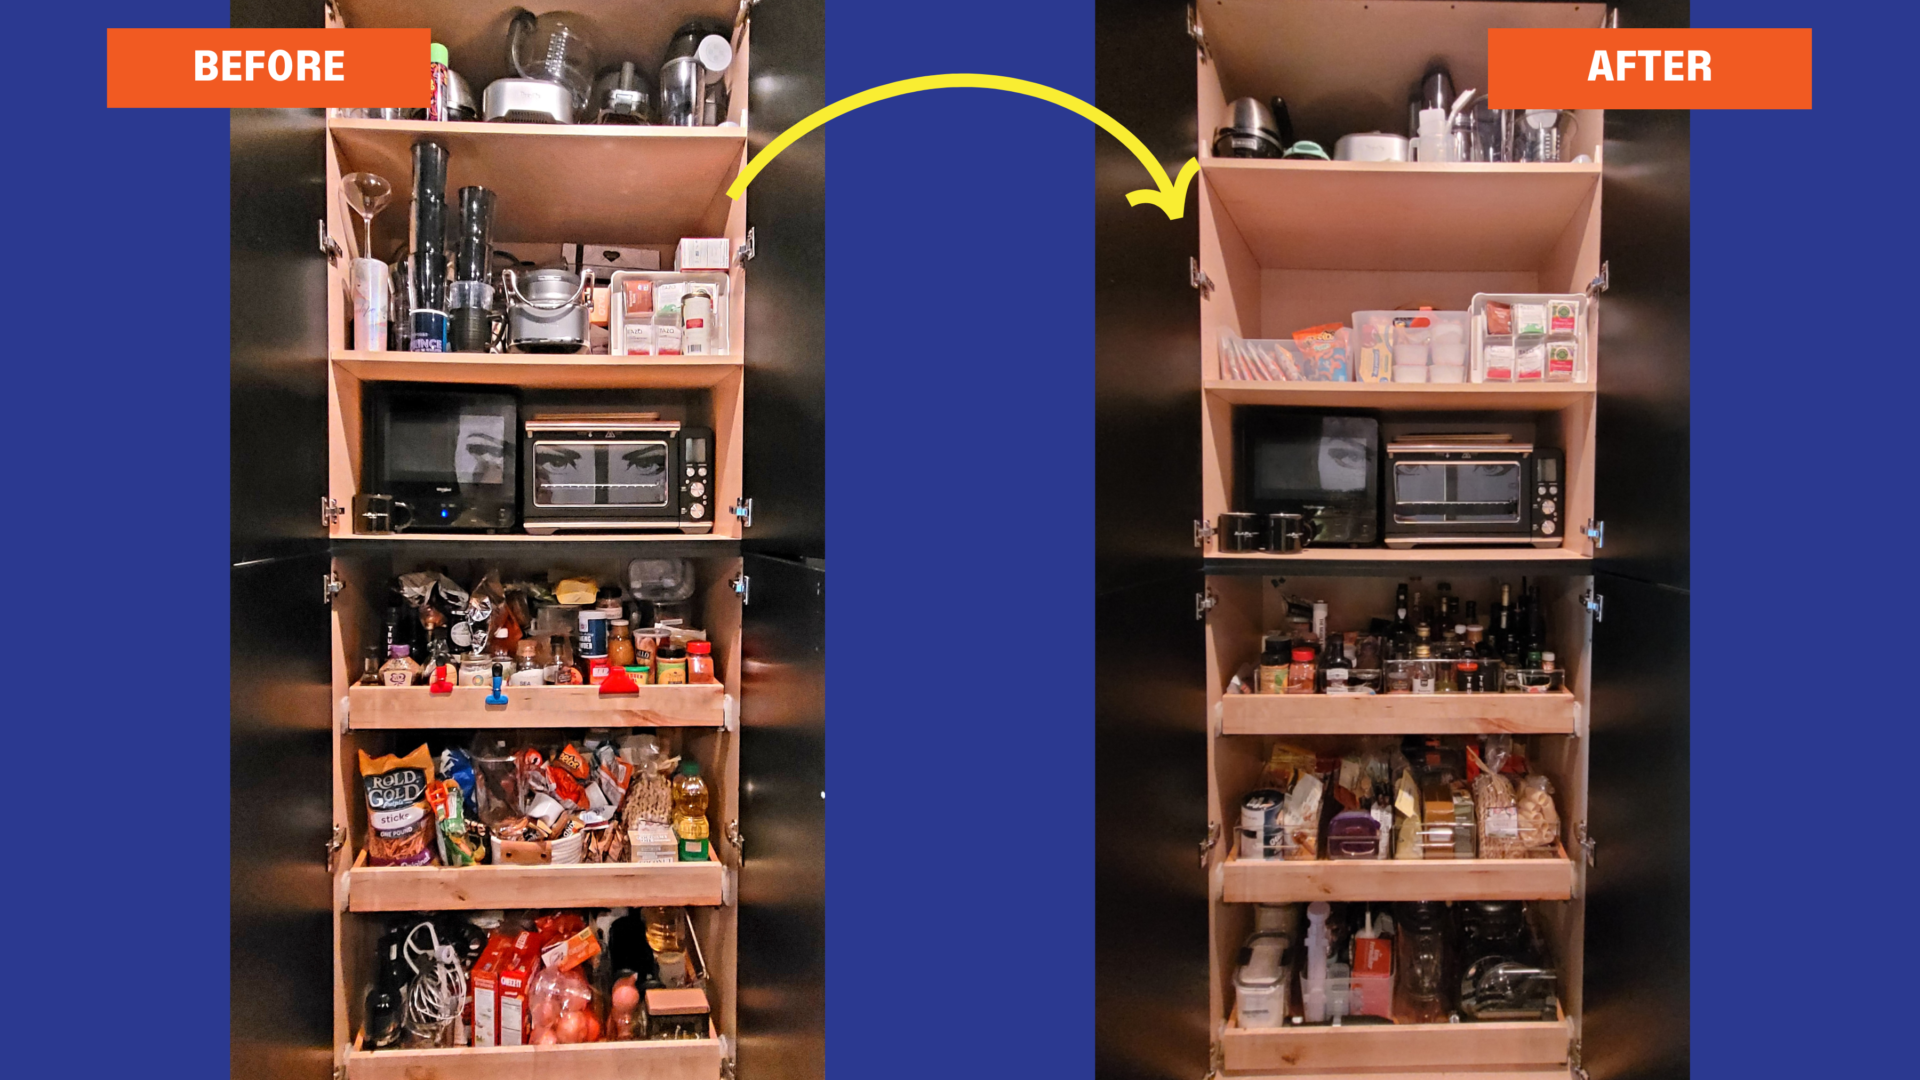 Before and after of a pantry. Left is more cluttered and the right is more clean and easier to find food/seasonings.